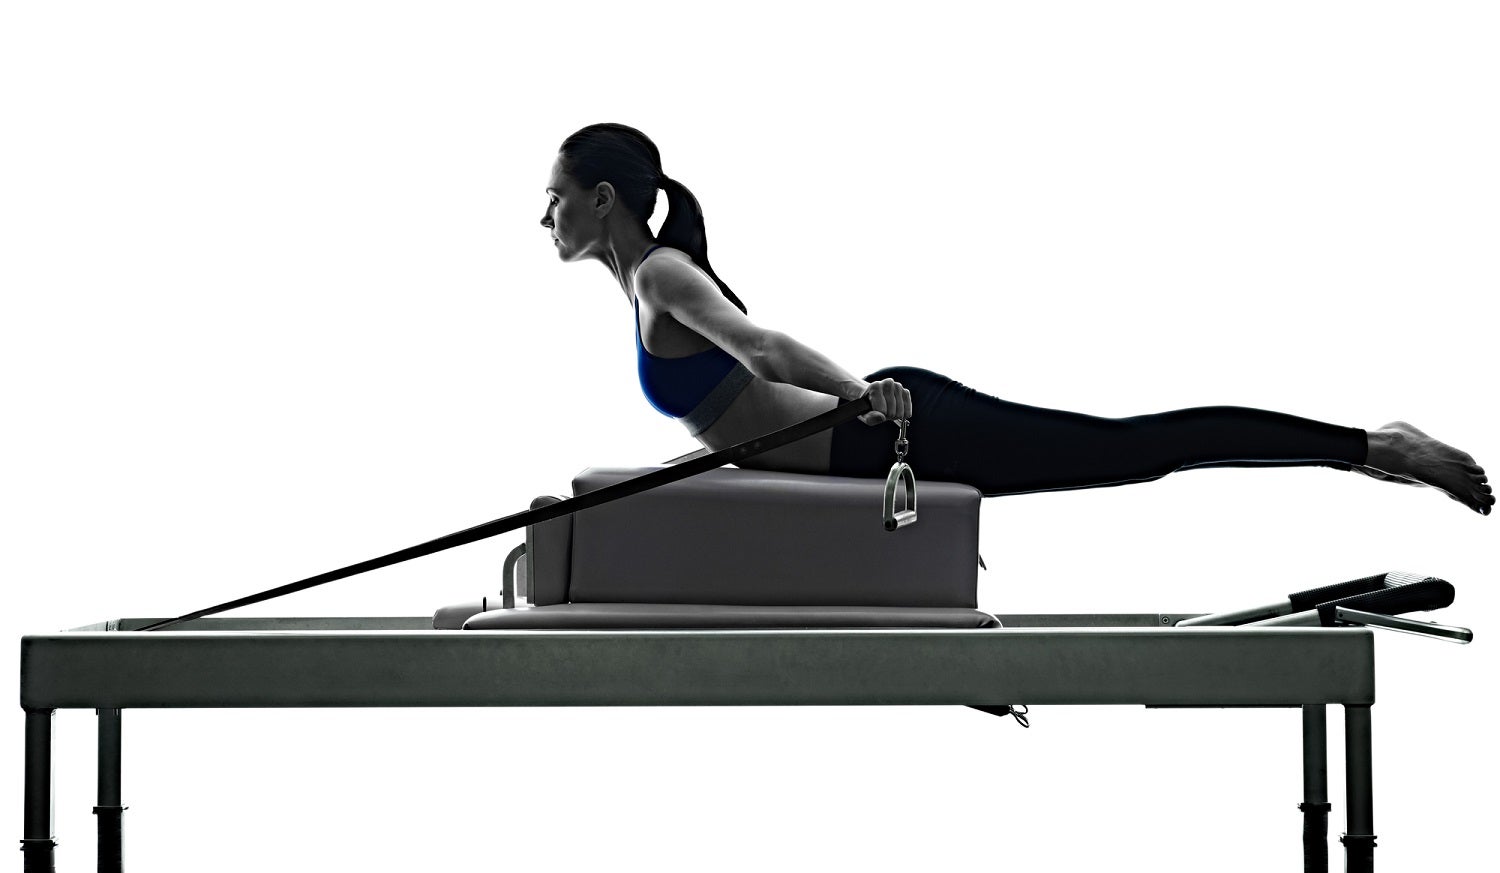 Person in blue sports bra and leggings on stretching their back on a Pilates reformer machine